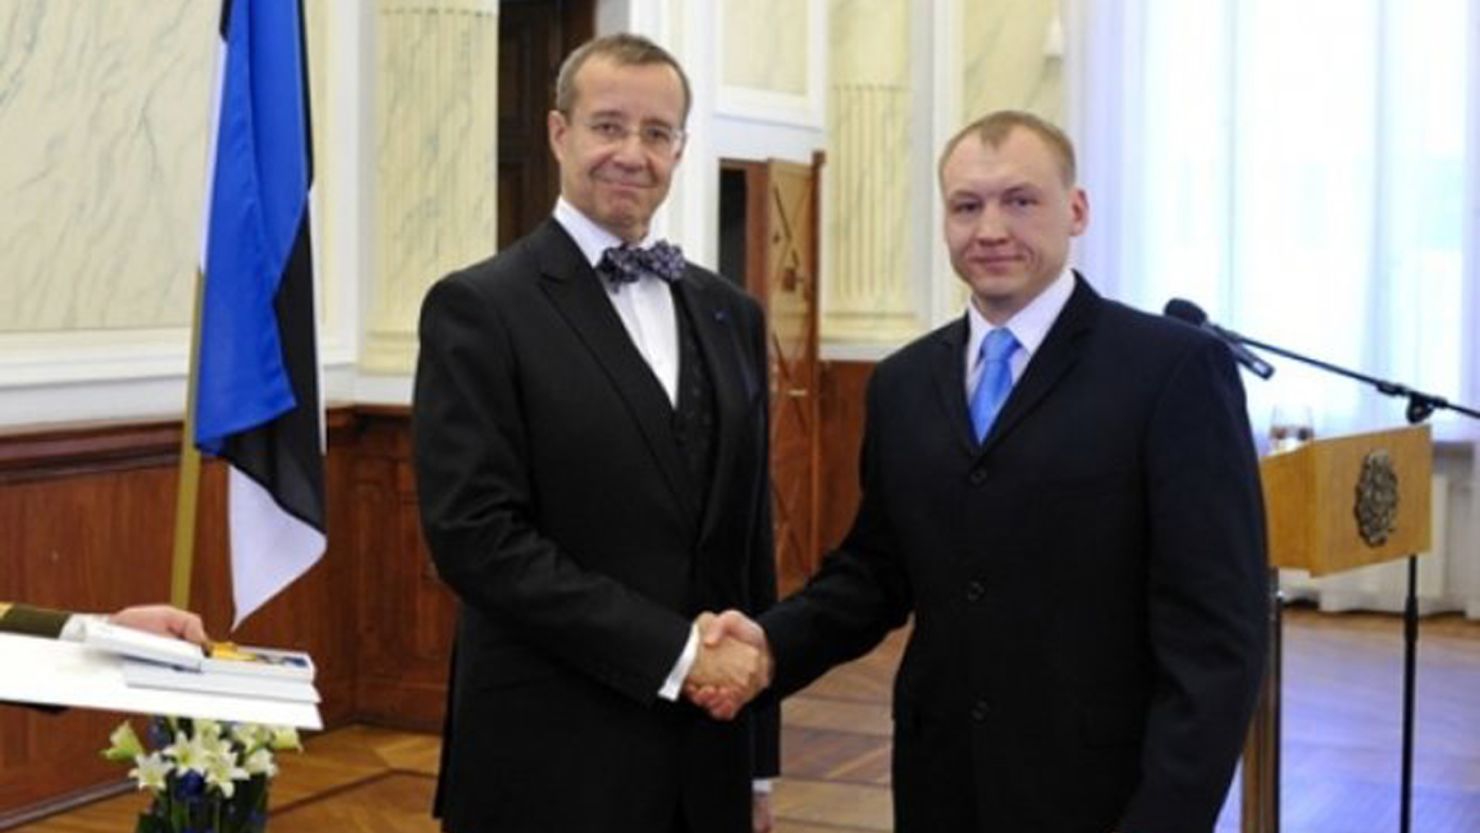 Russia said it detained Eston Kohver. Kohver, right, is pictured in 2010 with Estonian President Toomas Hendrik Ilves.